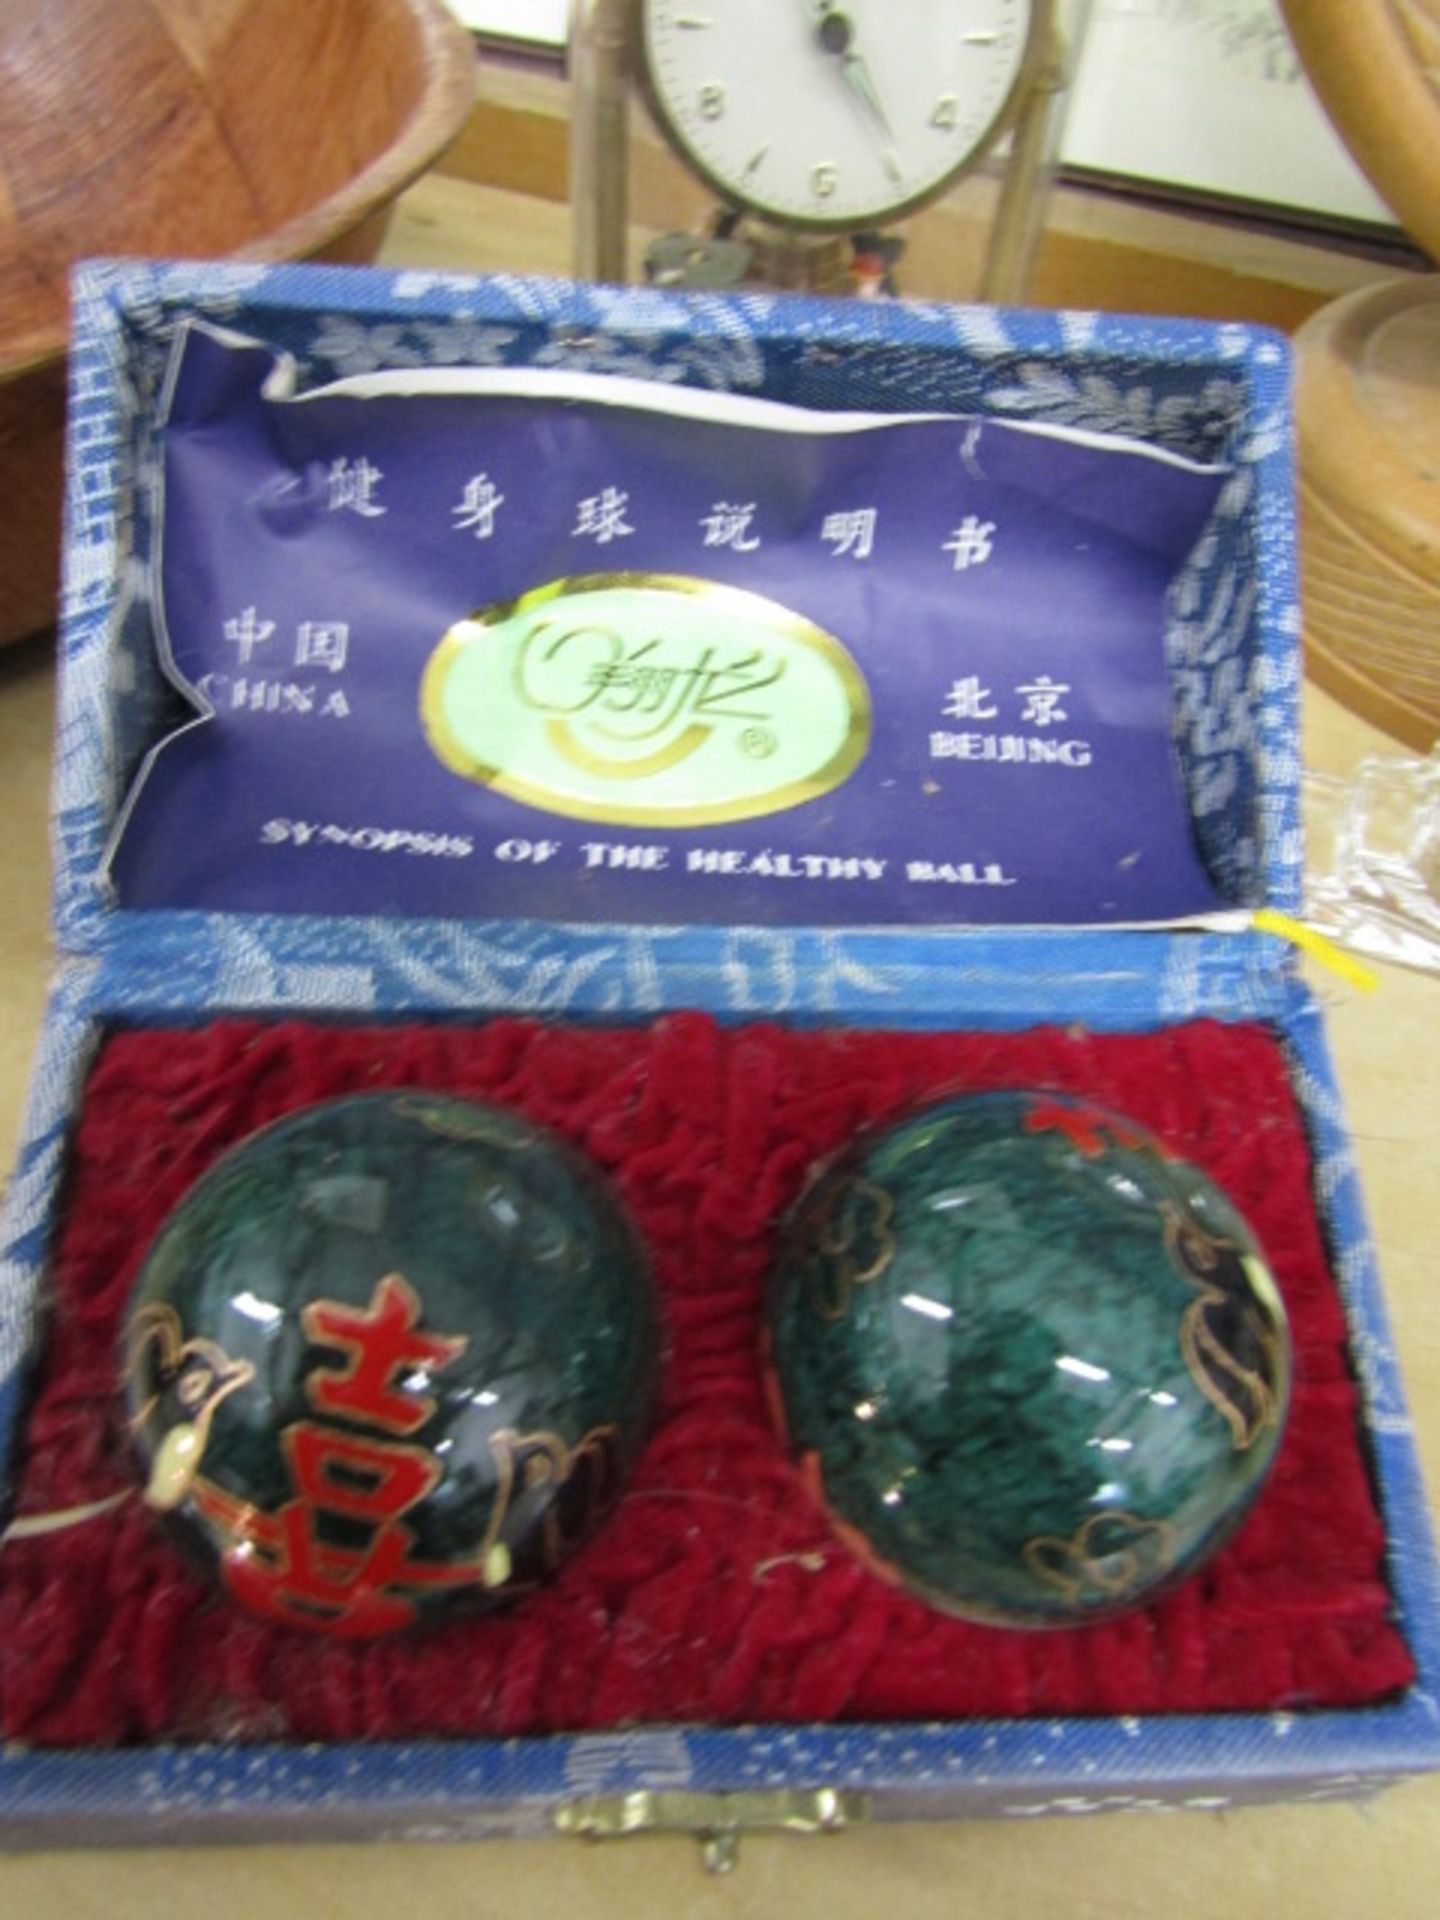 Collectors lot to inc clocks, barometer, tins & buttons, Chinese healing balls etc etc - Image 5 of 8